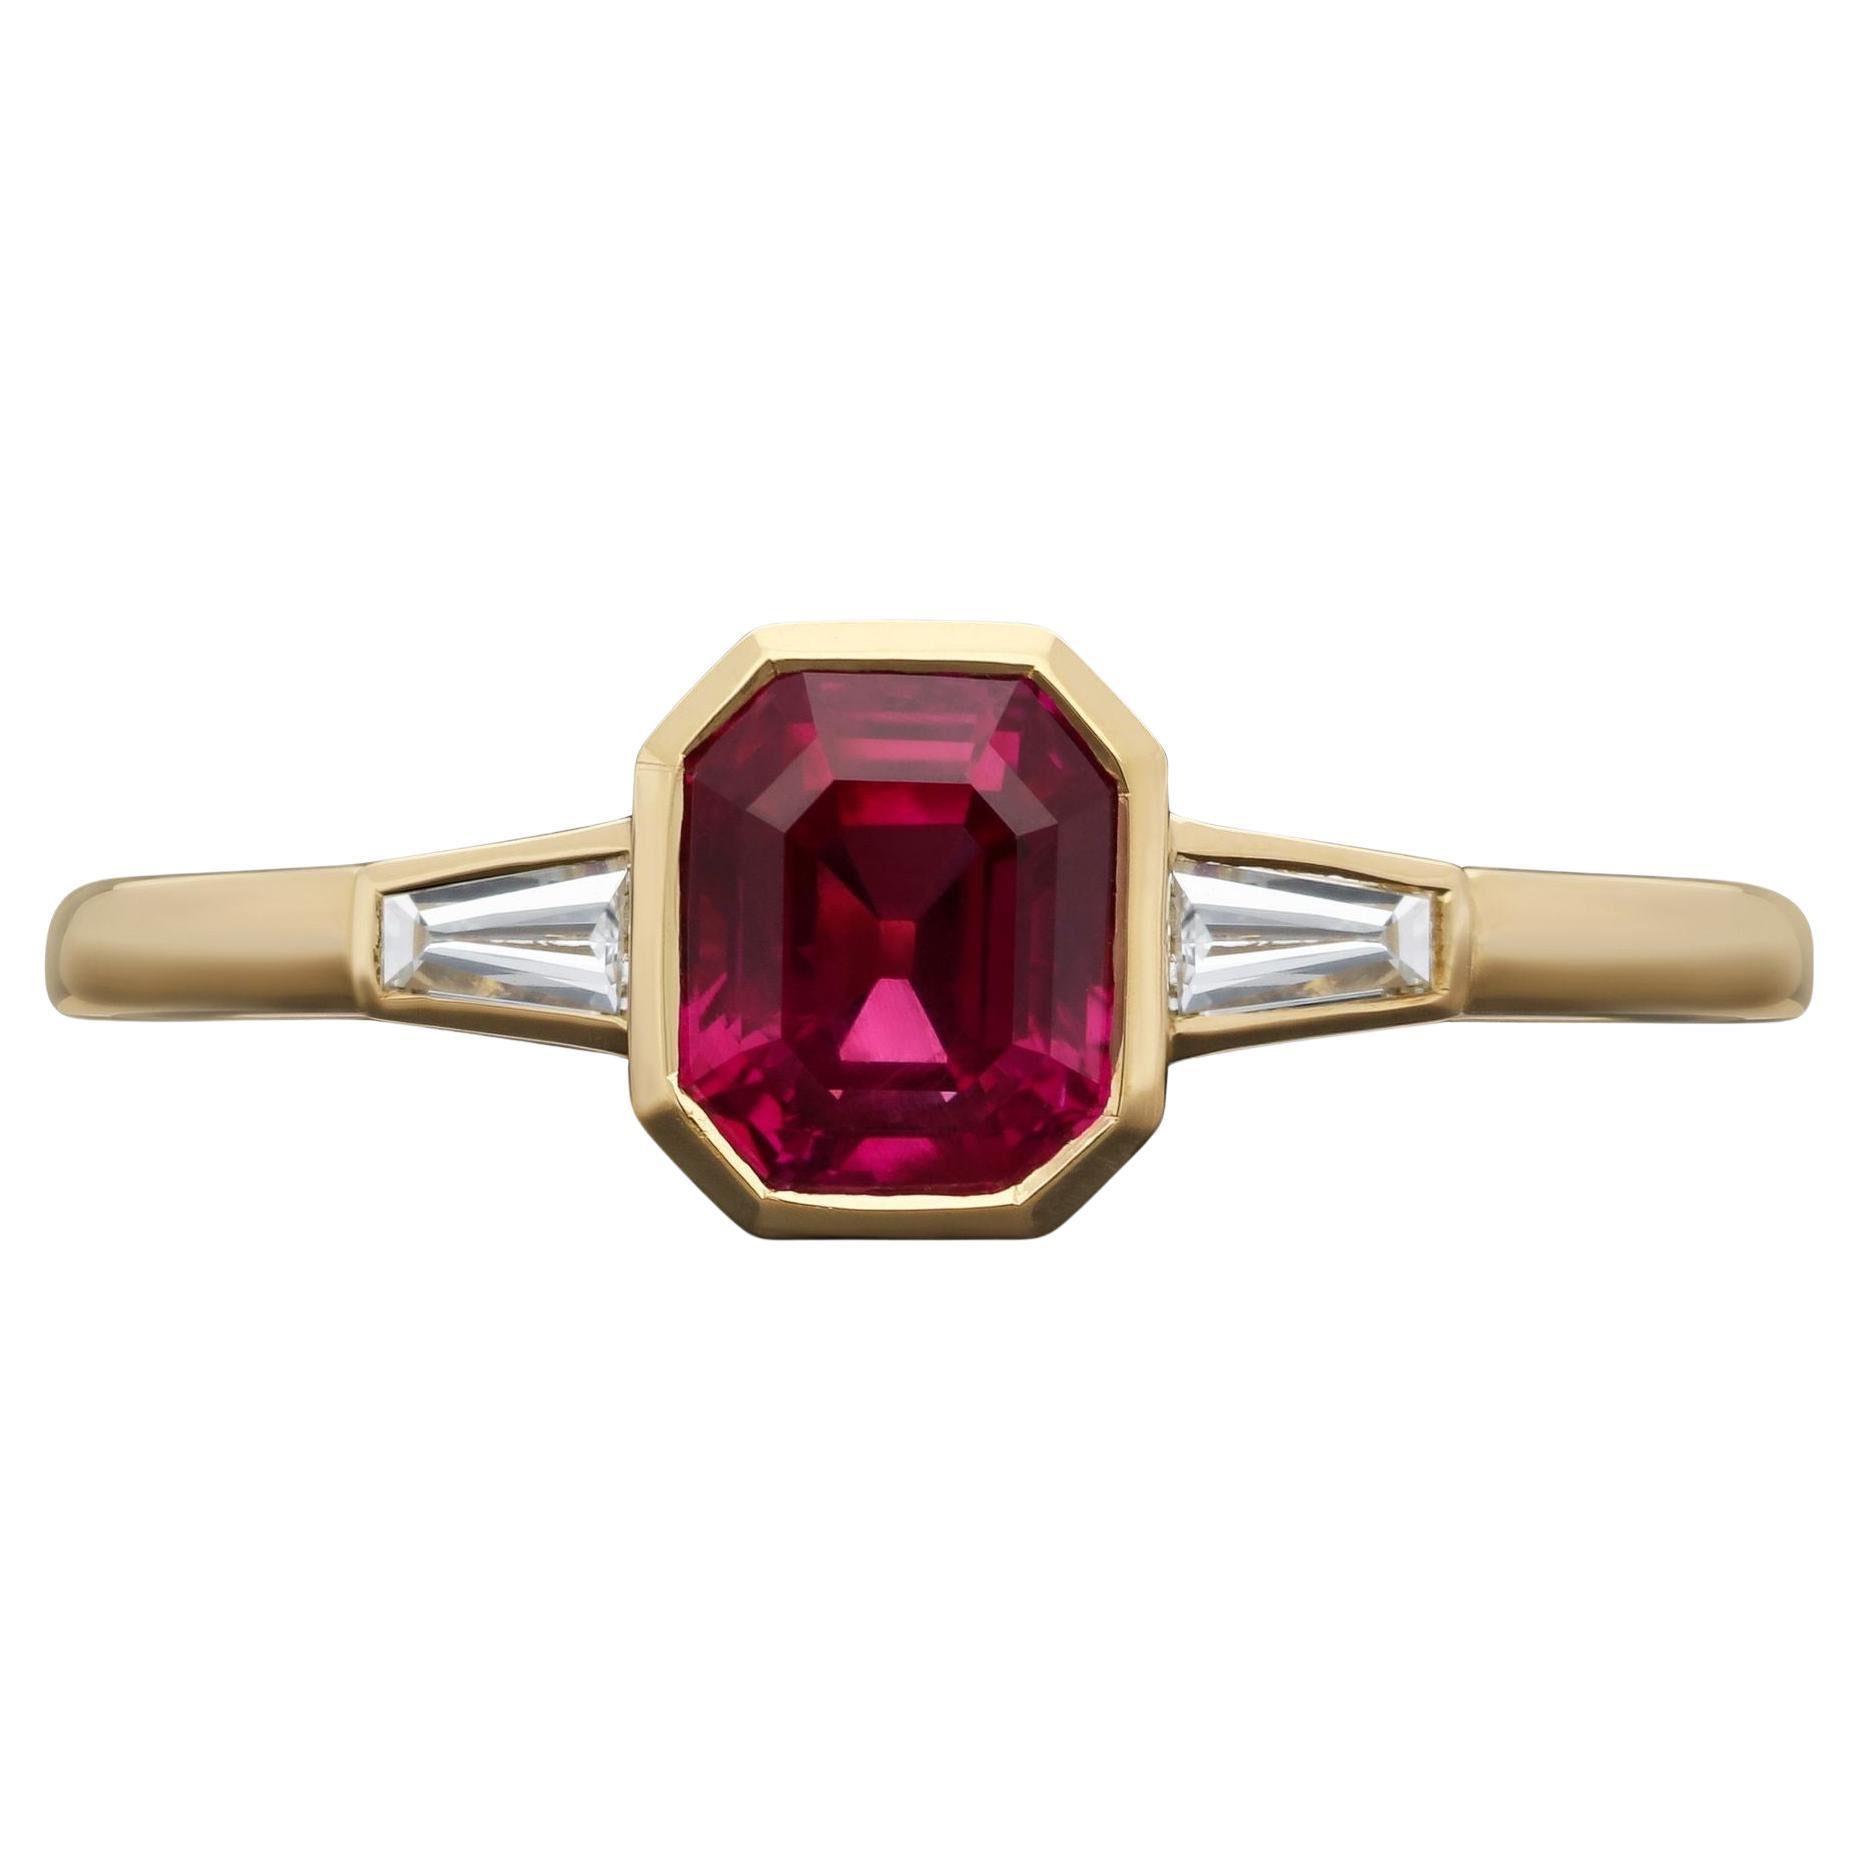 Hancocks 1.09ct Burmese Ruby Ring With Baguette Diamond Shoulders Contemporary For Sale